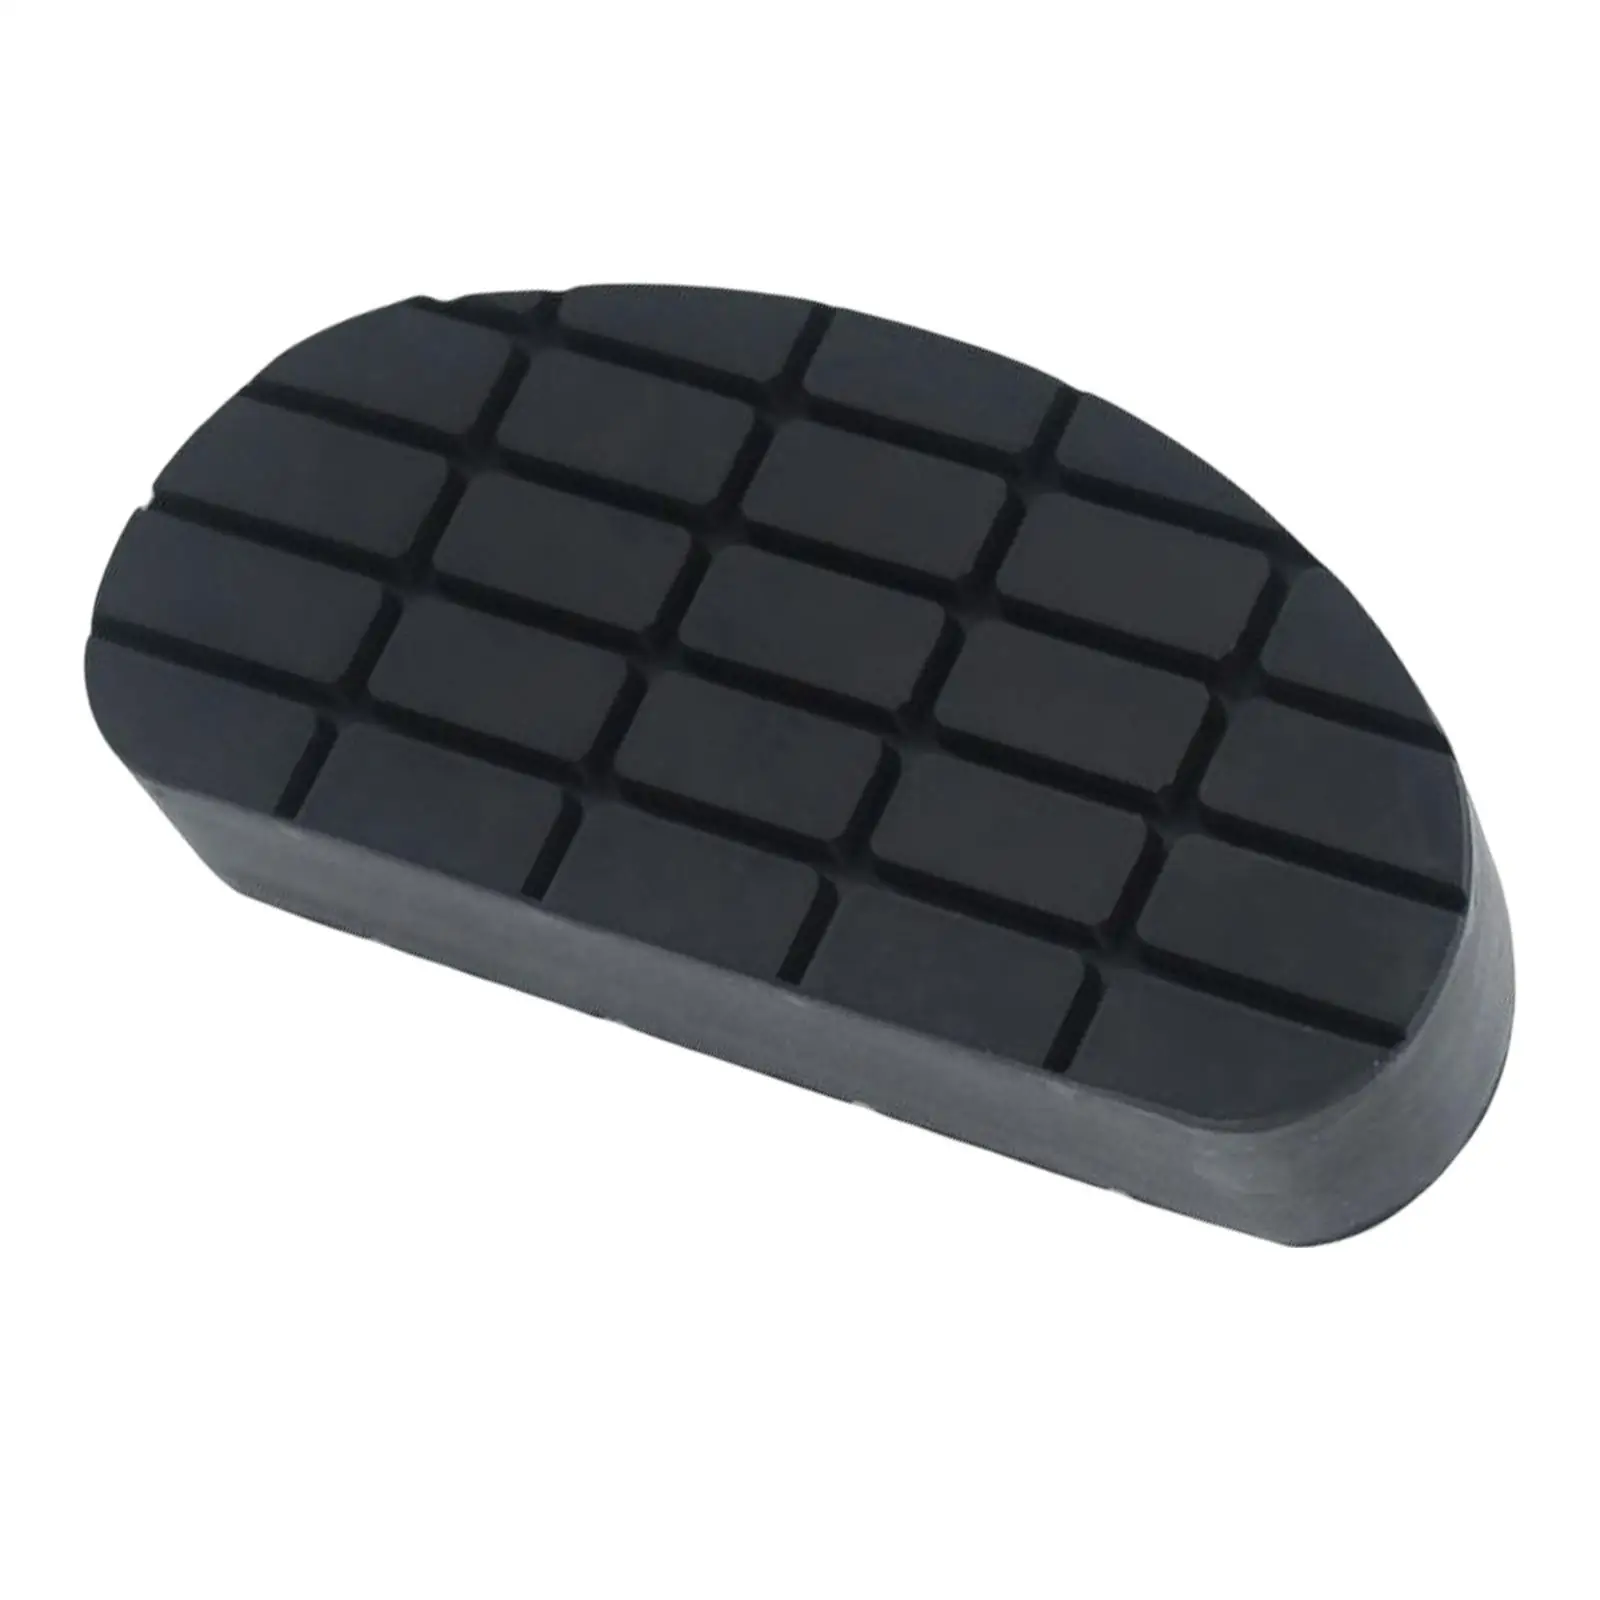 Cow Trimming Cushion Wearproof Professional Farrier Tools Accessories Cow Hoof Pad for Farm